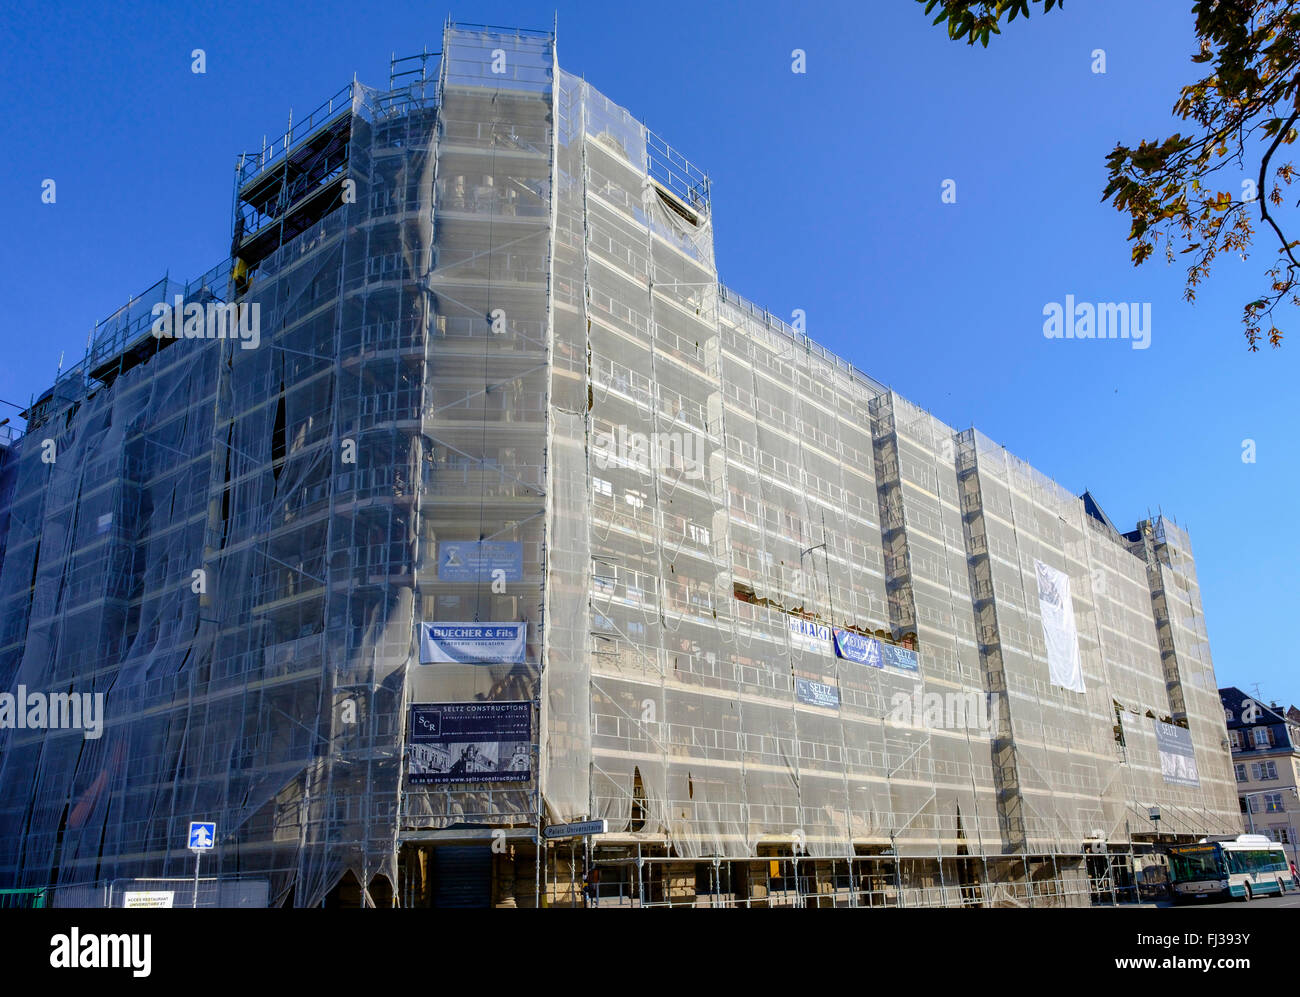 Scaffoldings, safety nets, facelift, Gallia student residence building undergoing renovation, Neustadt district, Strasbourg, Alsace, France, Europe, Stock Photo